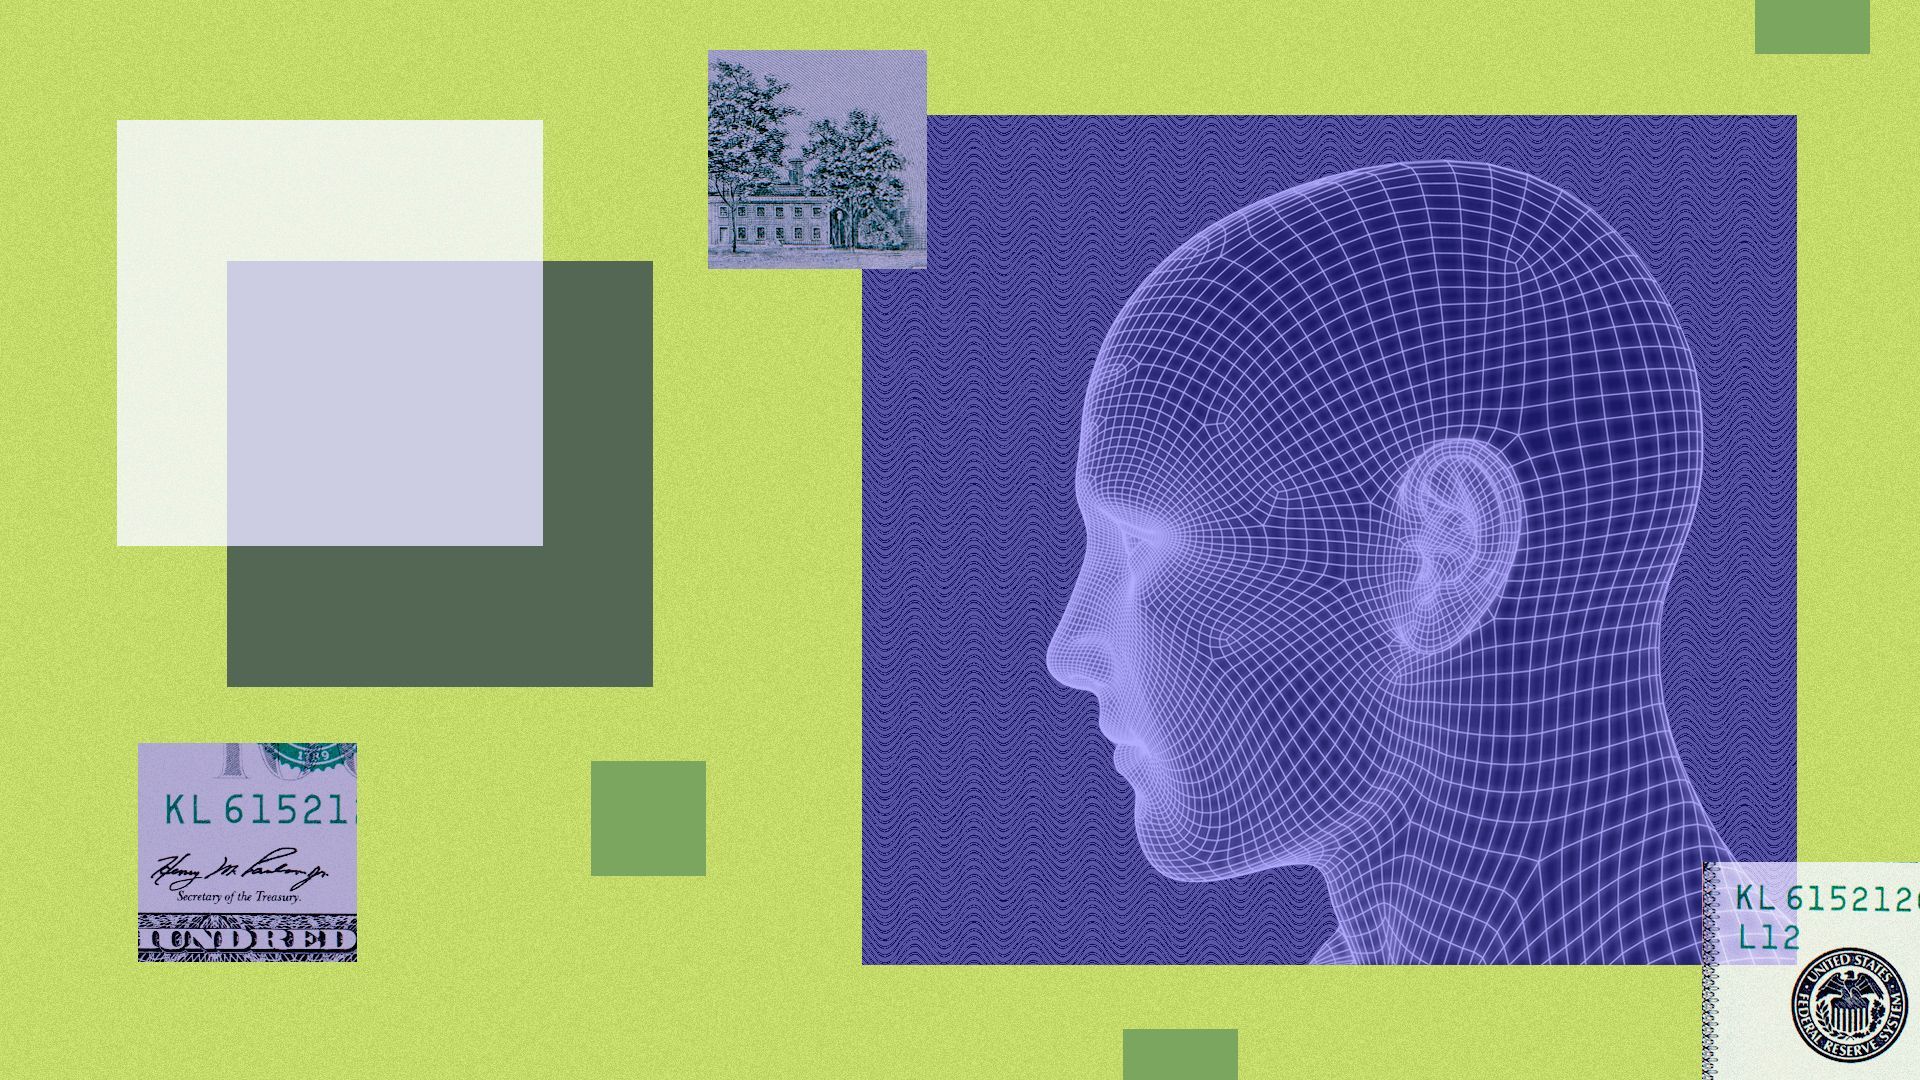 Illustration of a 3D wireframe of a head surrounded by money elements and abstract shapes.